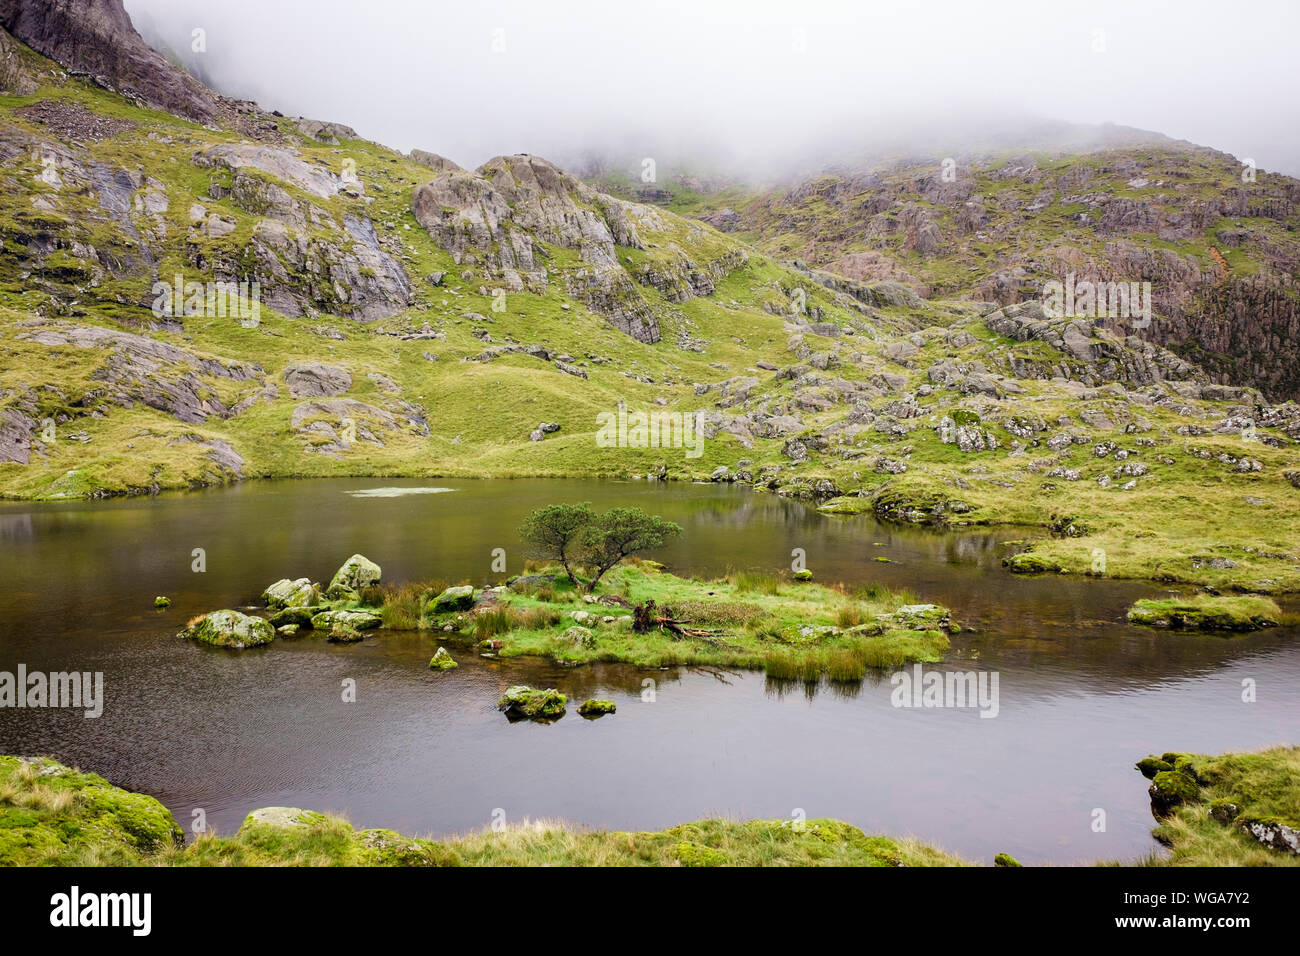 Remote Llyn Glas lake with tree on an island in Cwm Glas with low cloud on mountains of Snowdonia National Park. Nant Peris Llanberis Gwynedd Wales UK Stock Photo